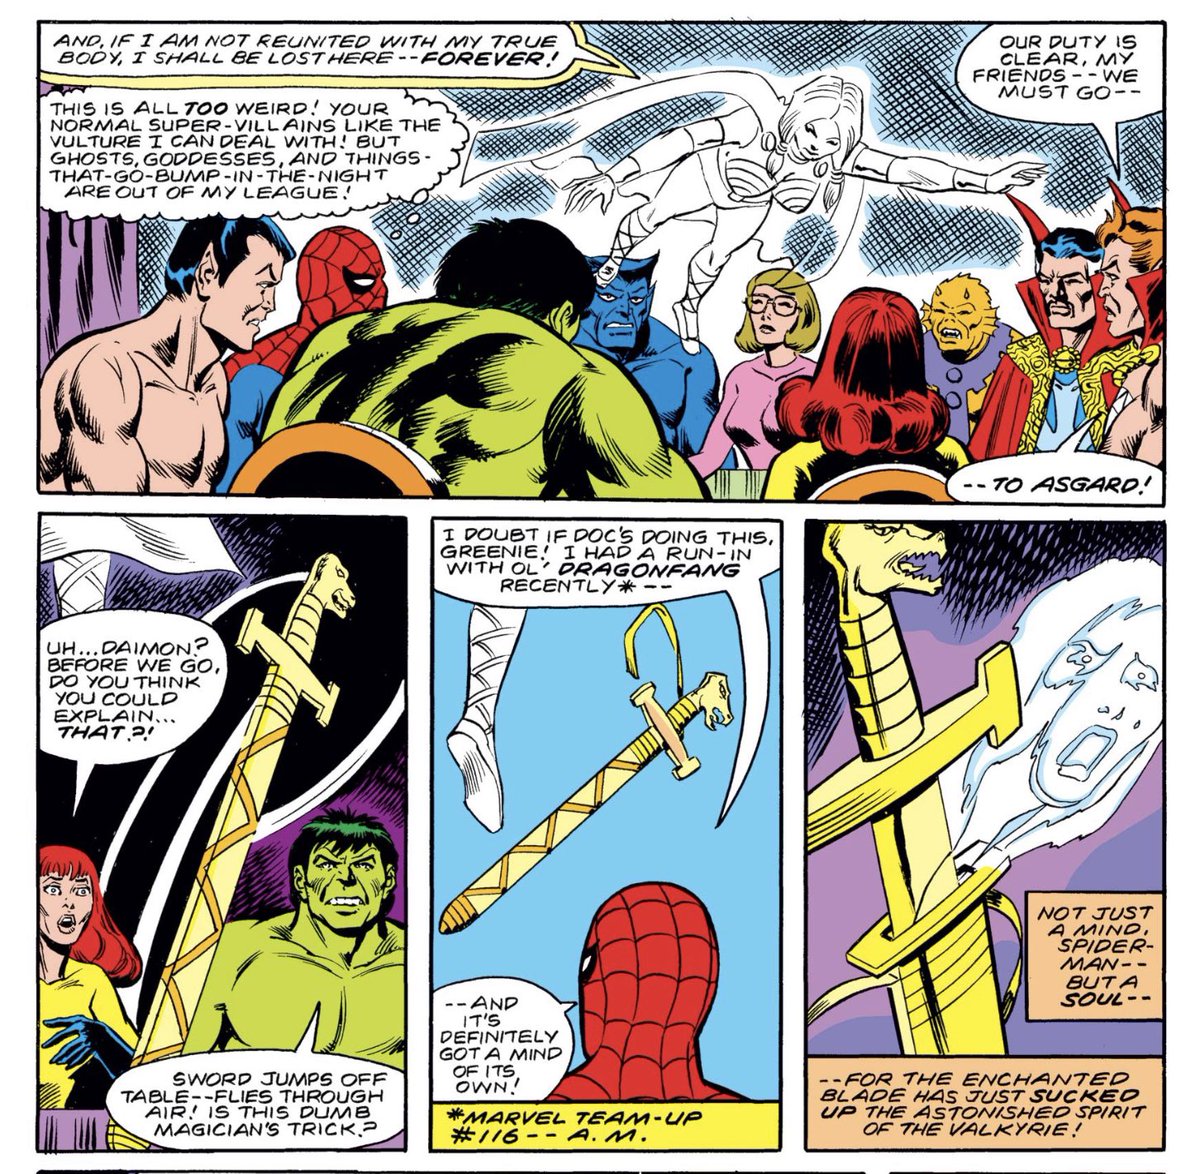 Except Valkyrie is maybe not all the way dead yet… #Defenders #80sMarvel